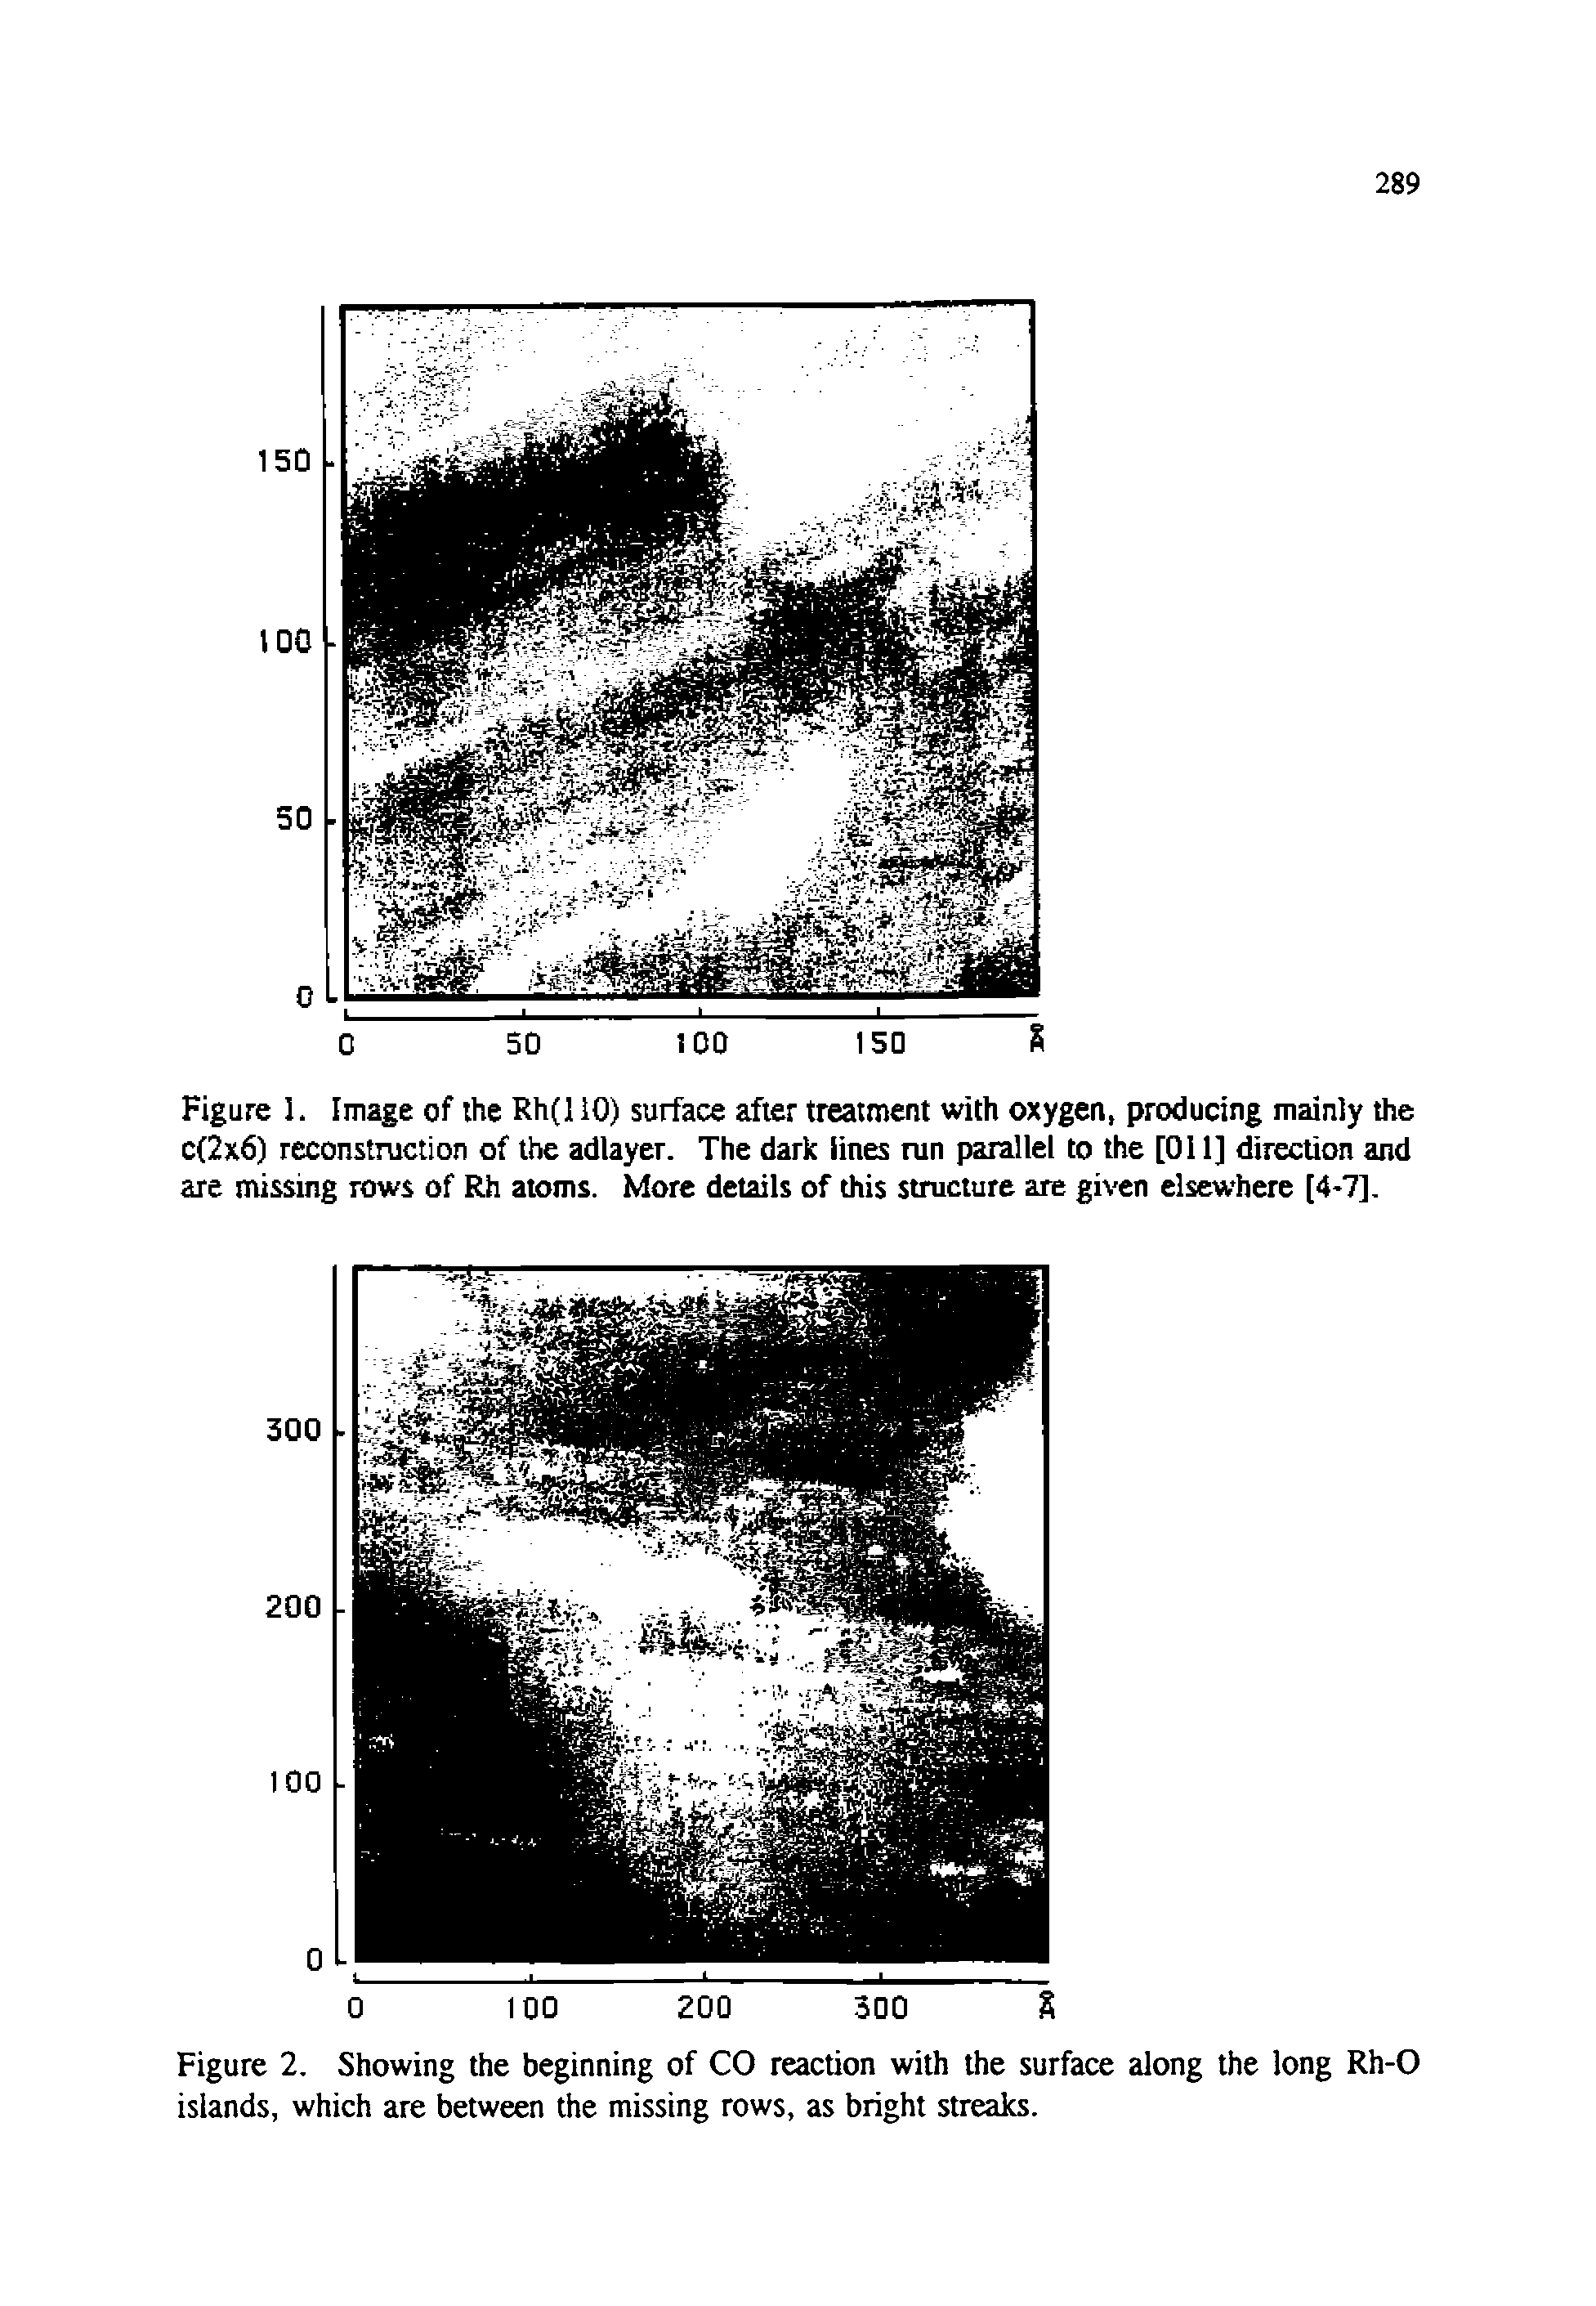 Figure 2. Showing the beginning of CO reaction with the surface along the long Rh-0 islands, which are between the missing rows, as bright streaks.